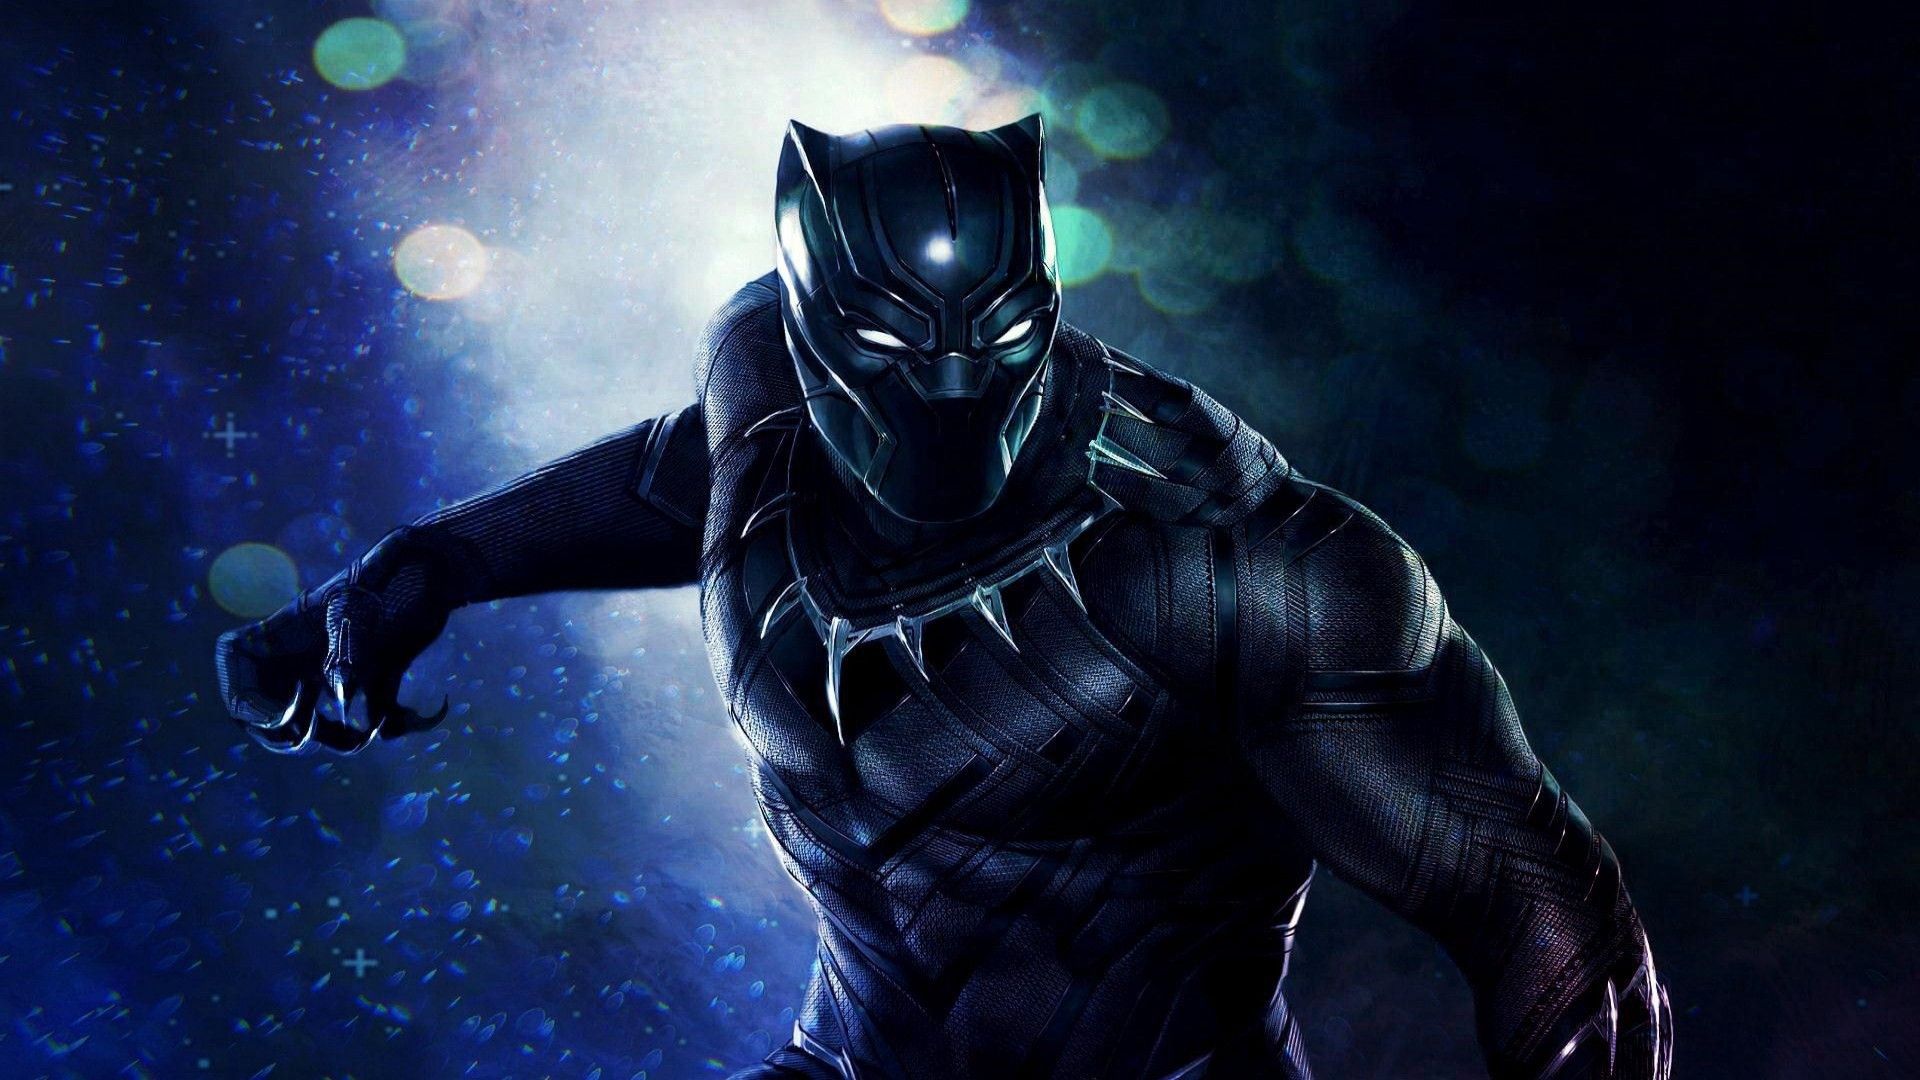 Spiderman and Black Panther could be coming to Fortnite later this season